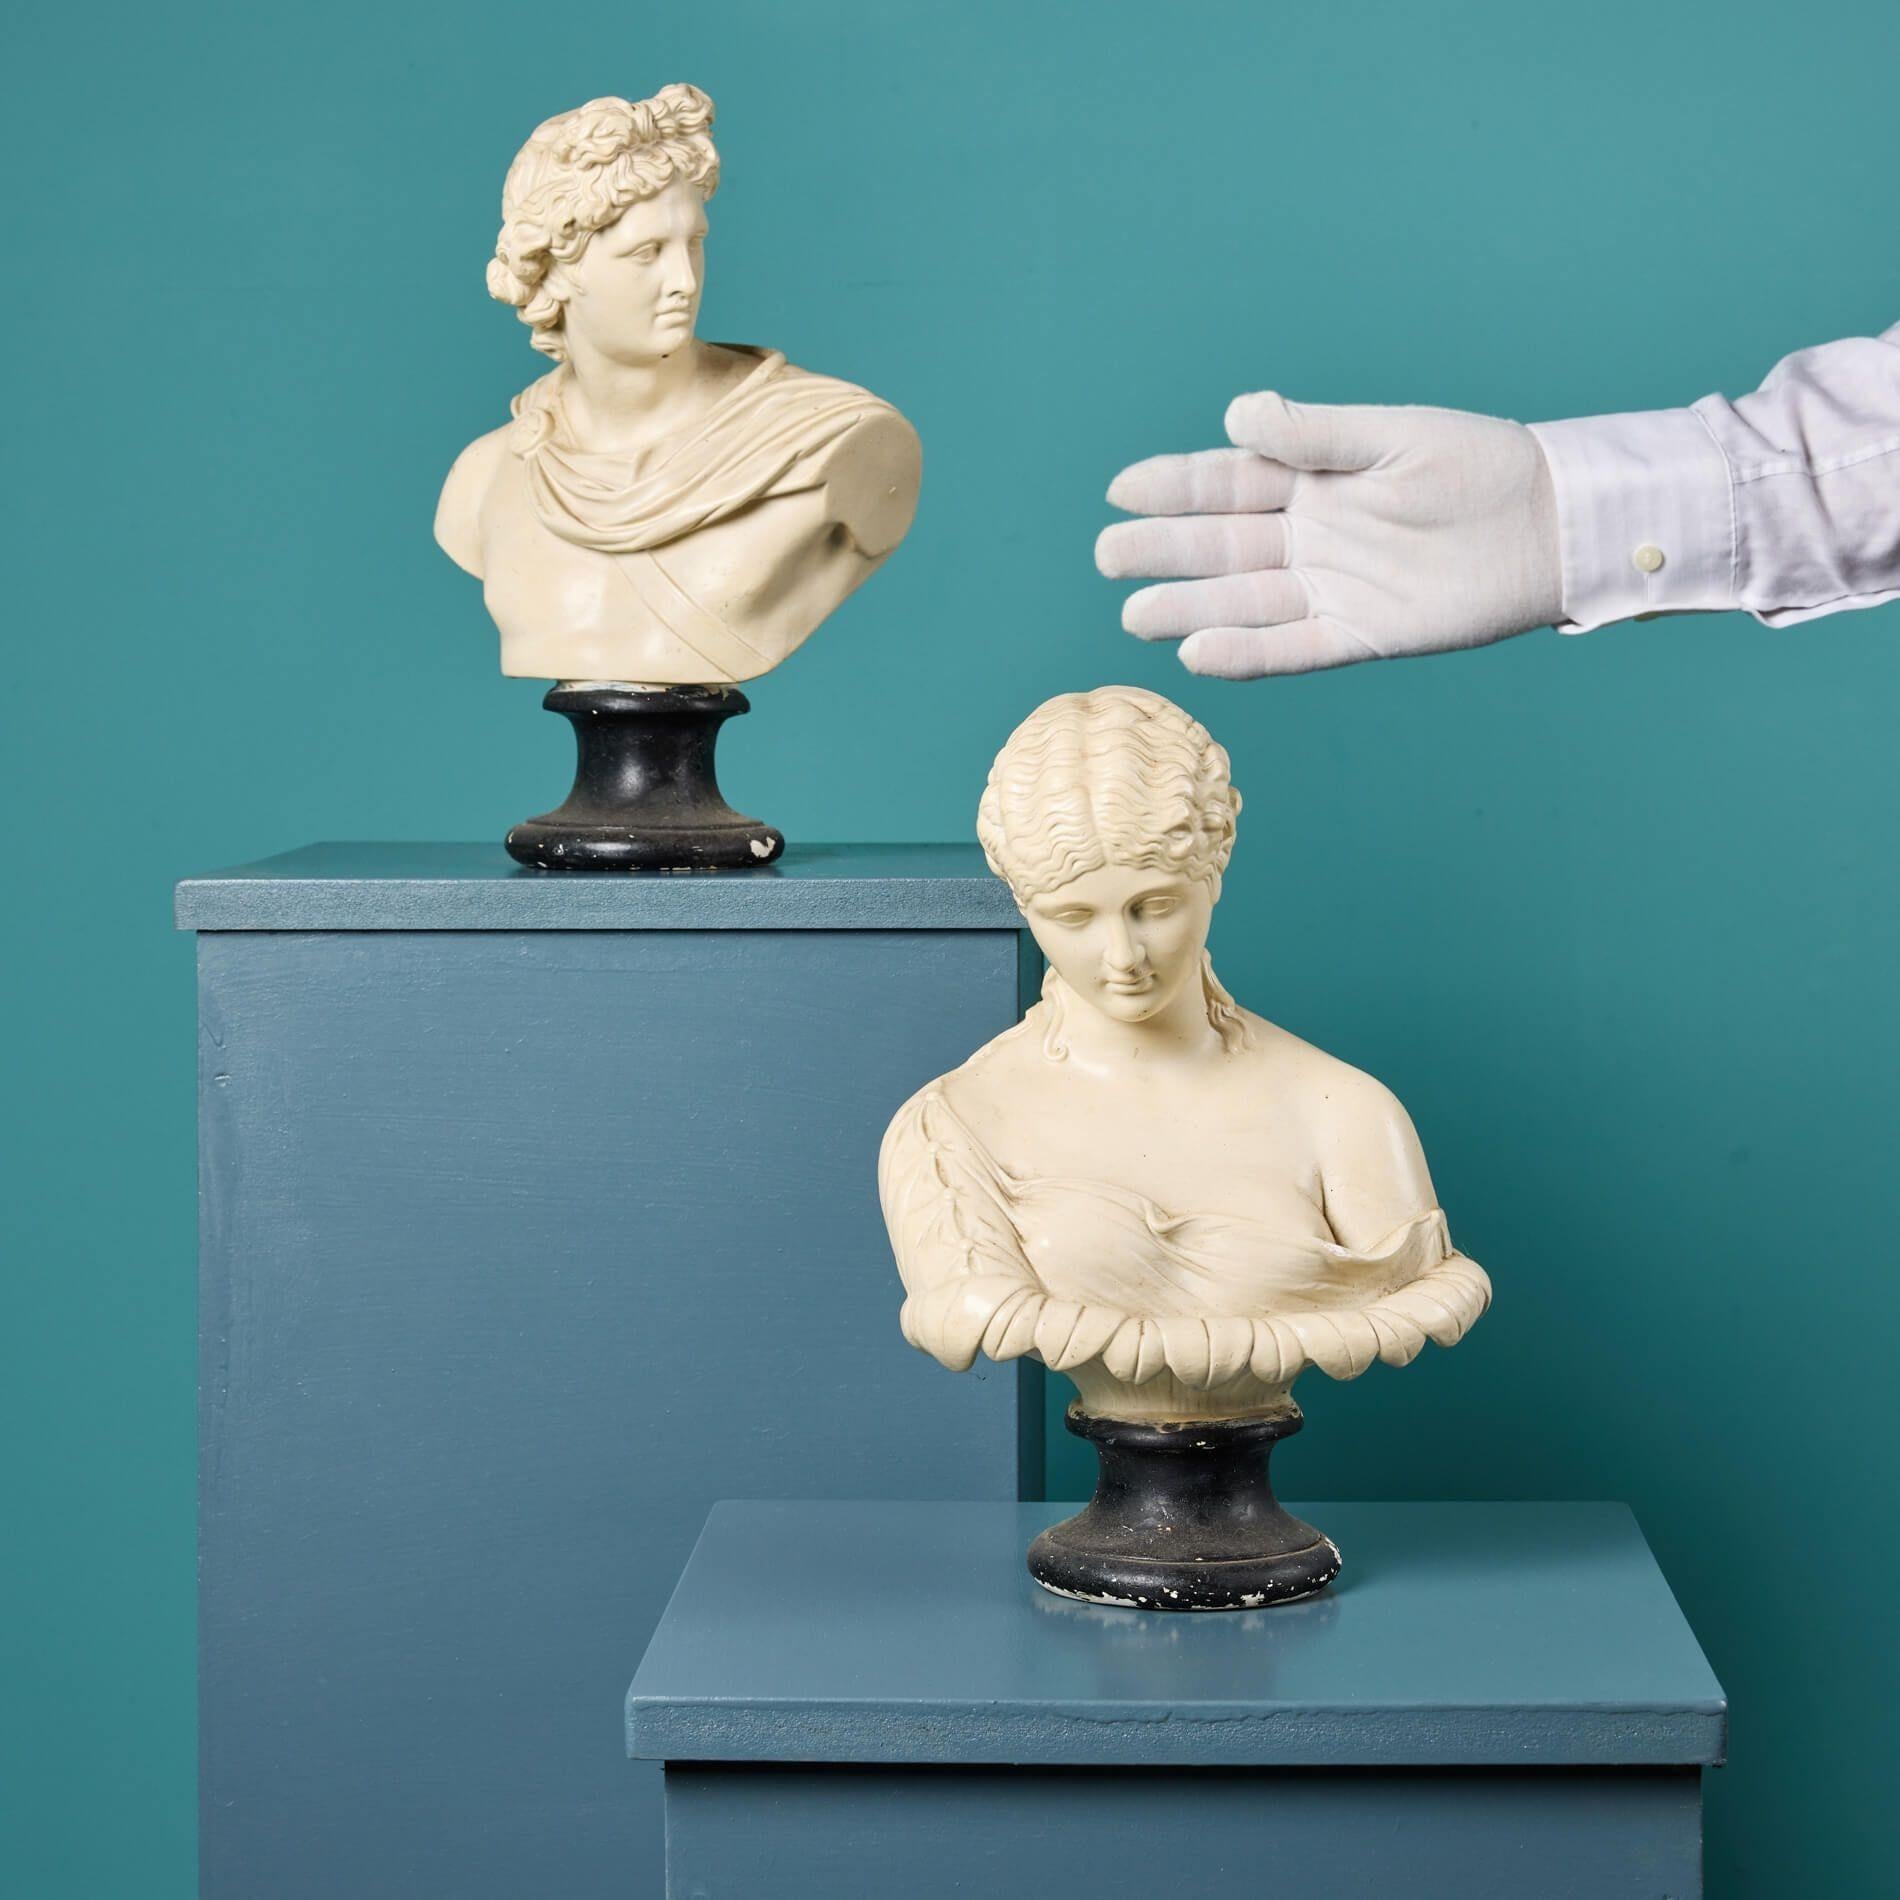 A pair of late 19th century painted plaster busts depicting figures of Greek Mythology, Apollo and Clytie. Made in plaster, these Clytie and Apollo bust sculptures are each painted and sit on a turned socle base. Together, these neoclassical style